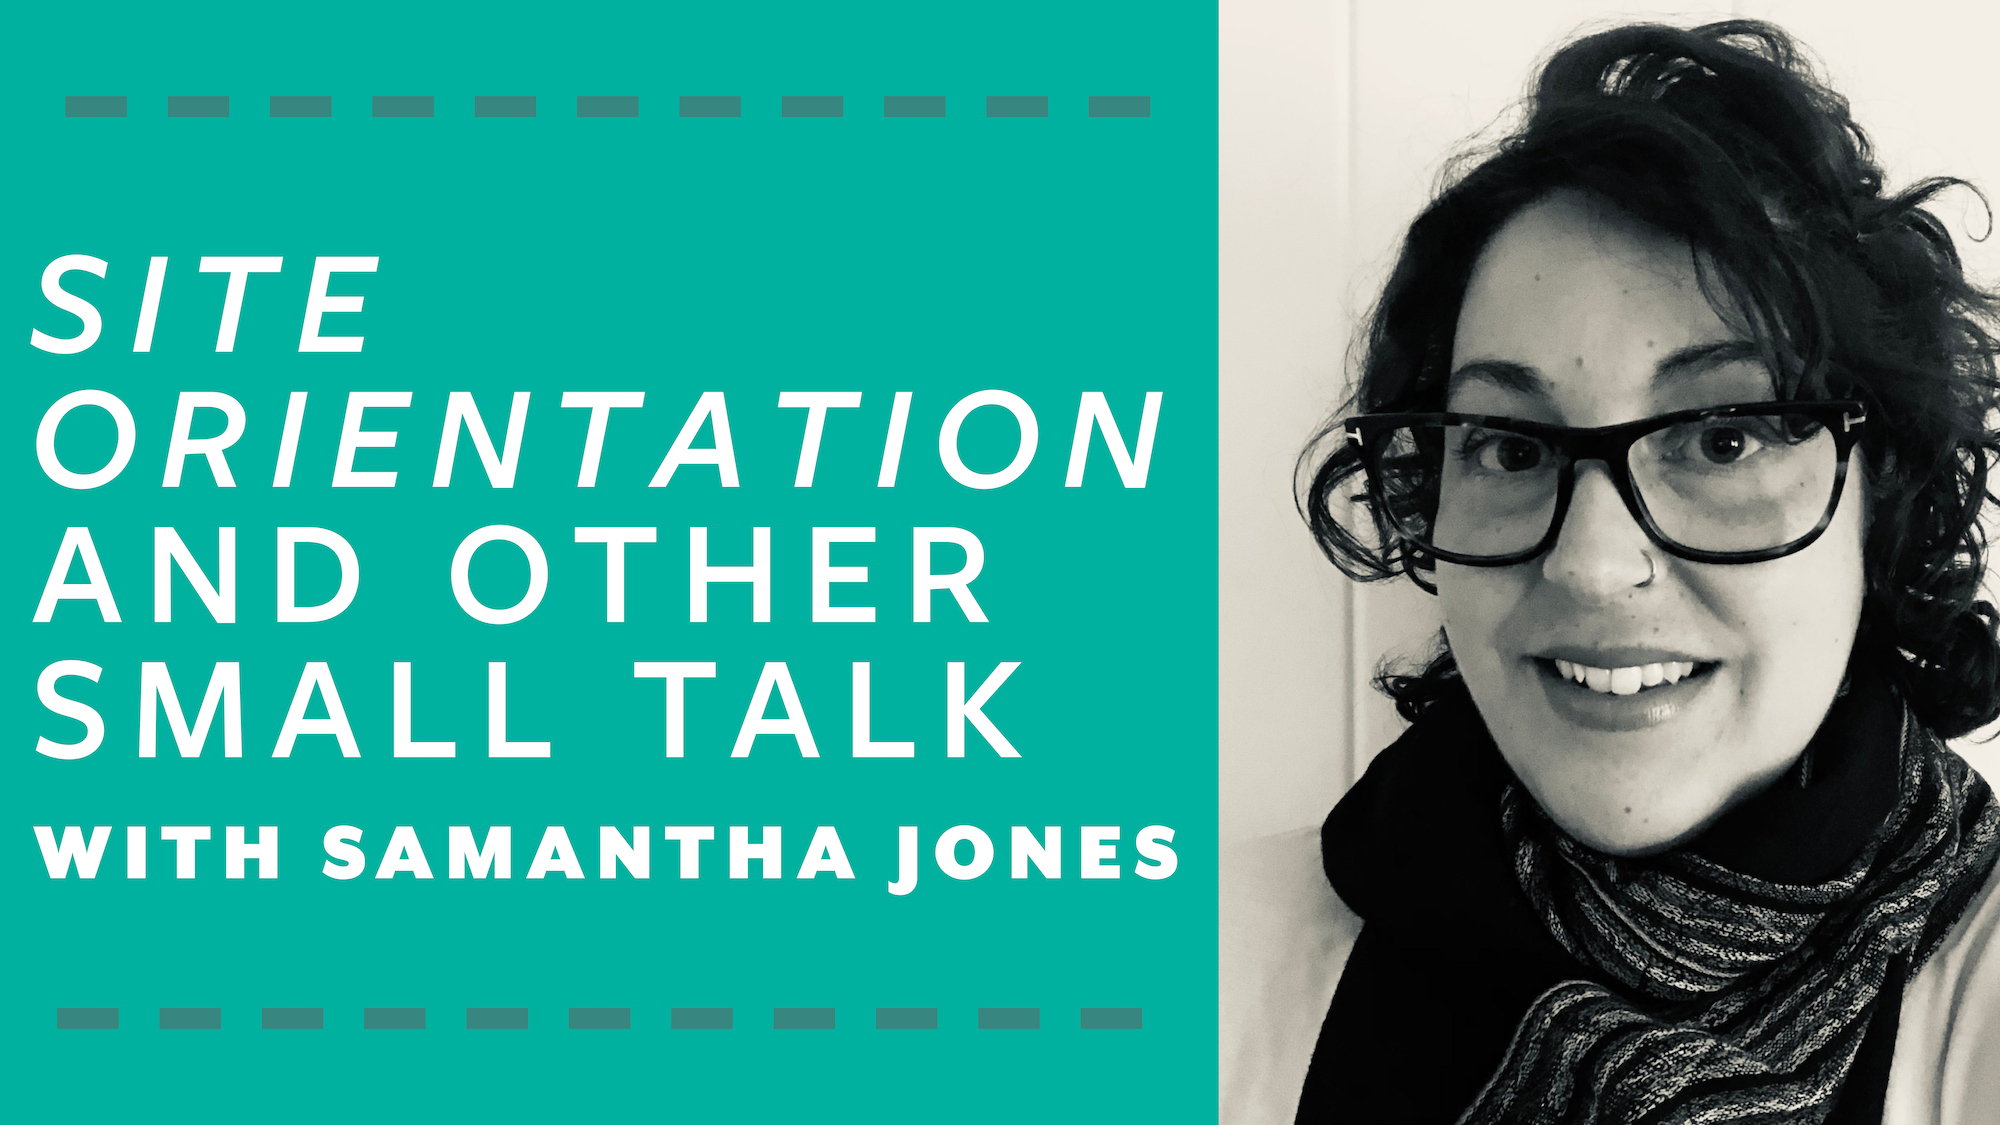 Feature Image with the messaging "Site Orientation and Other Small Talk with Samantha Jones"